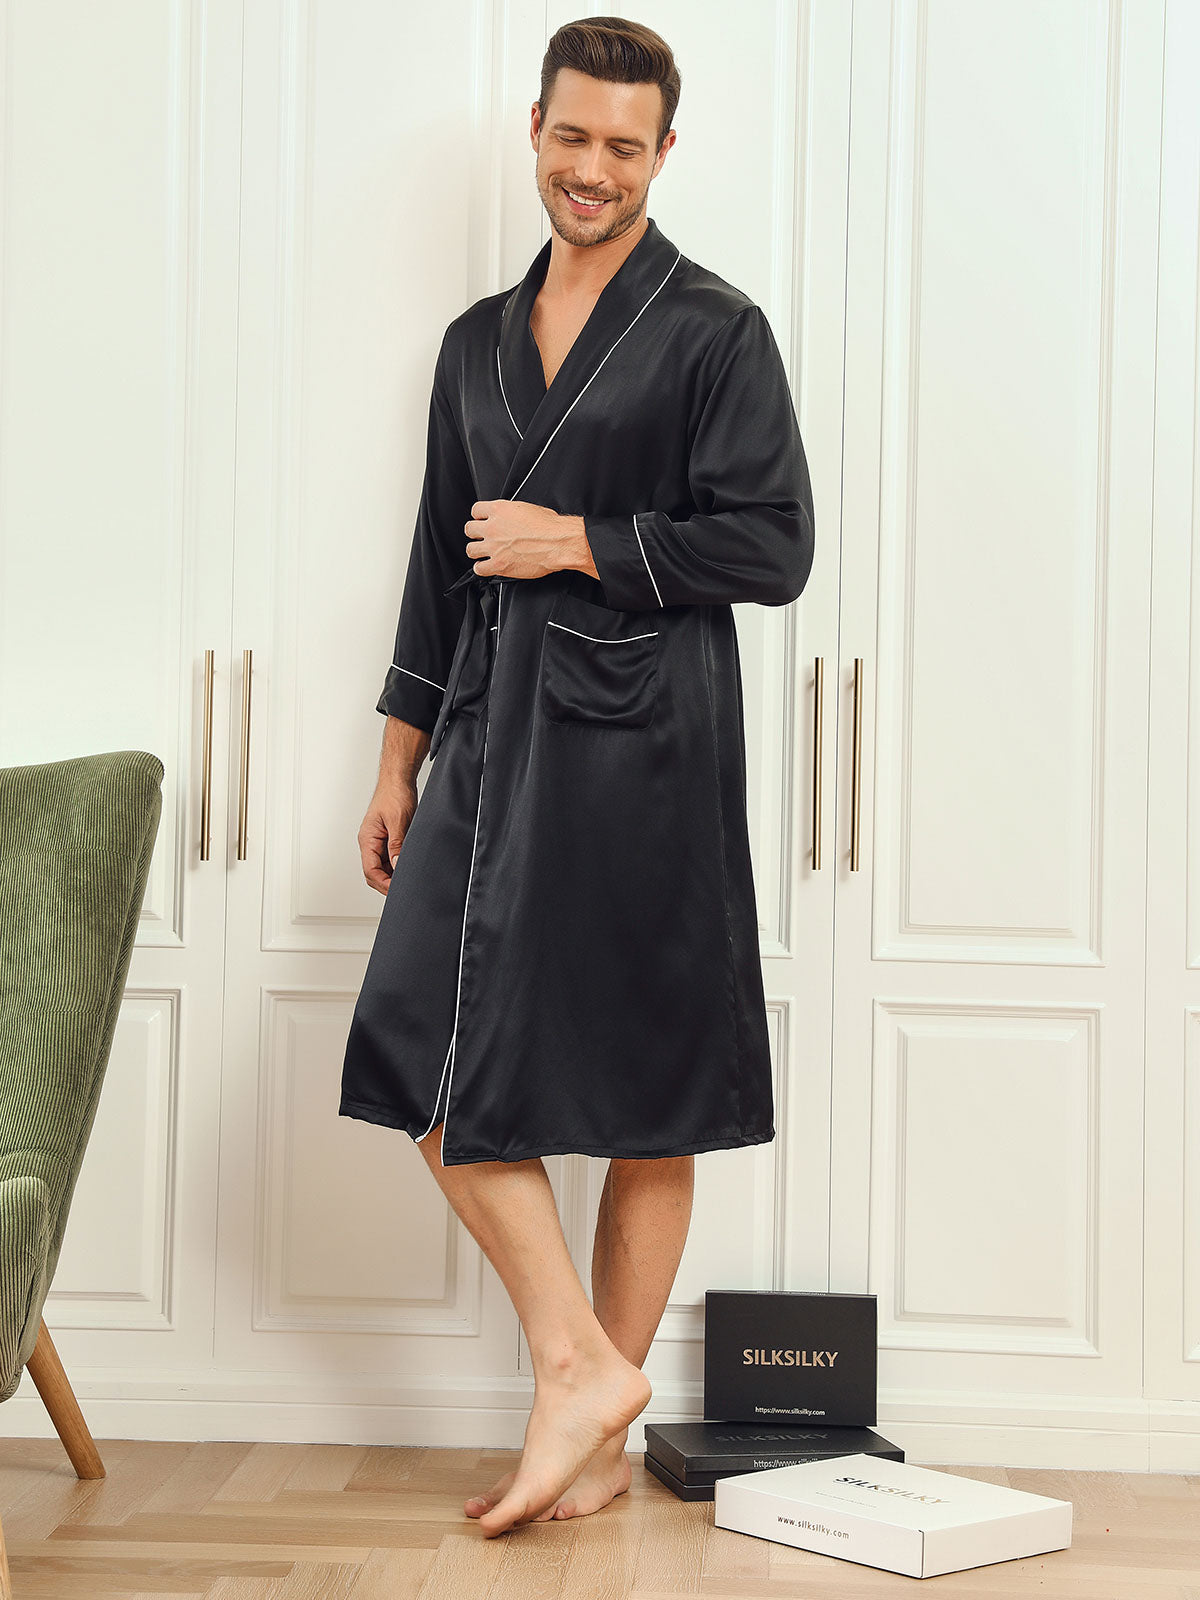 Men's Bespoke Luxury Smoking Robes and Dressing Gowns in Silk and Velvet